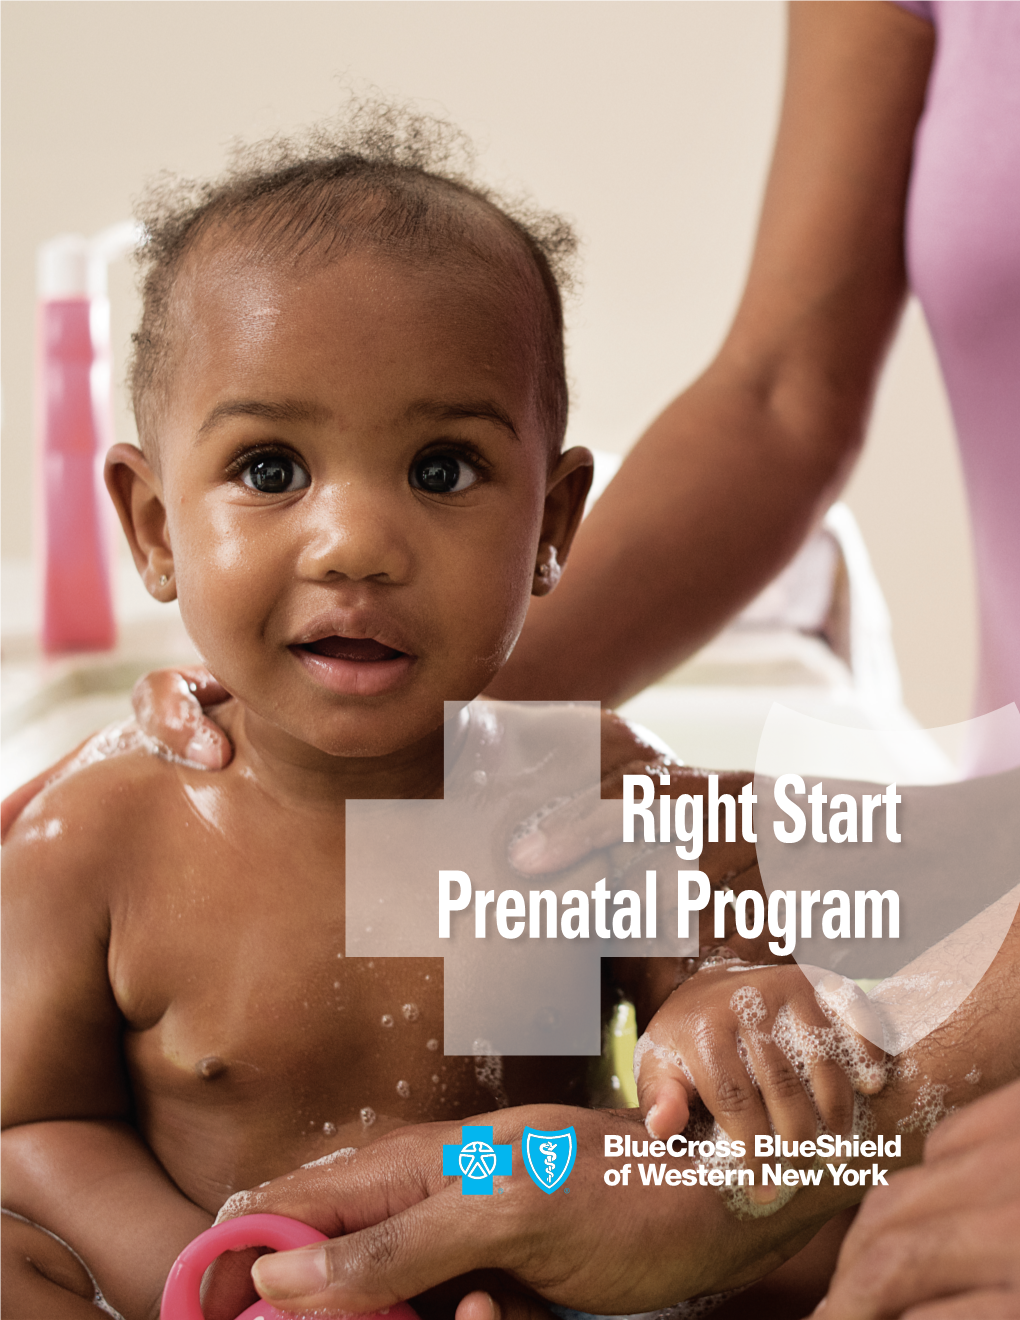 Right Start Prenatal Program This Booklet of Information Can Help You Learn What to Expect During Your Pregnancy